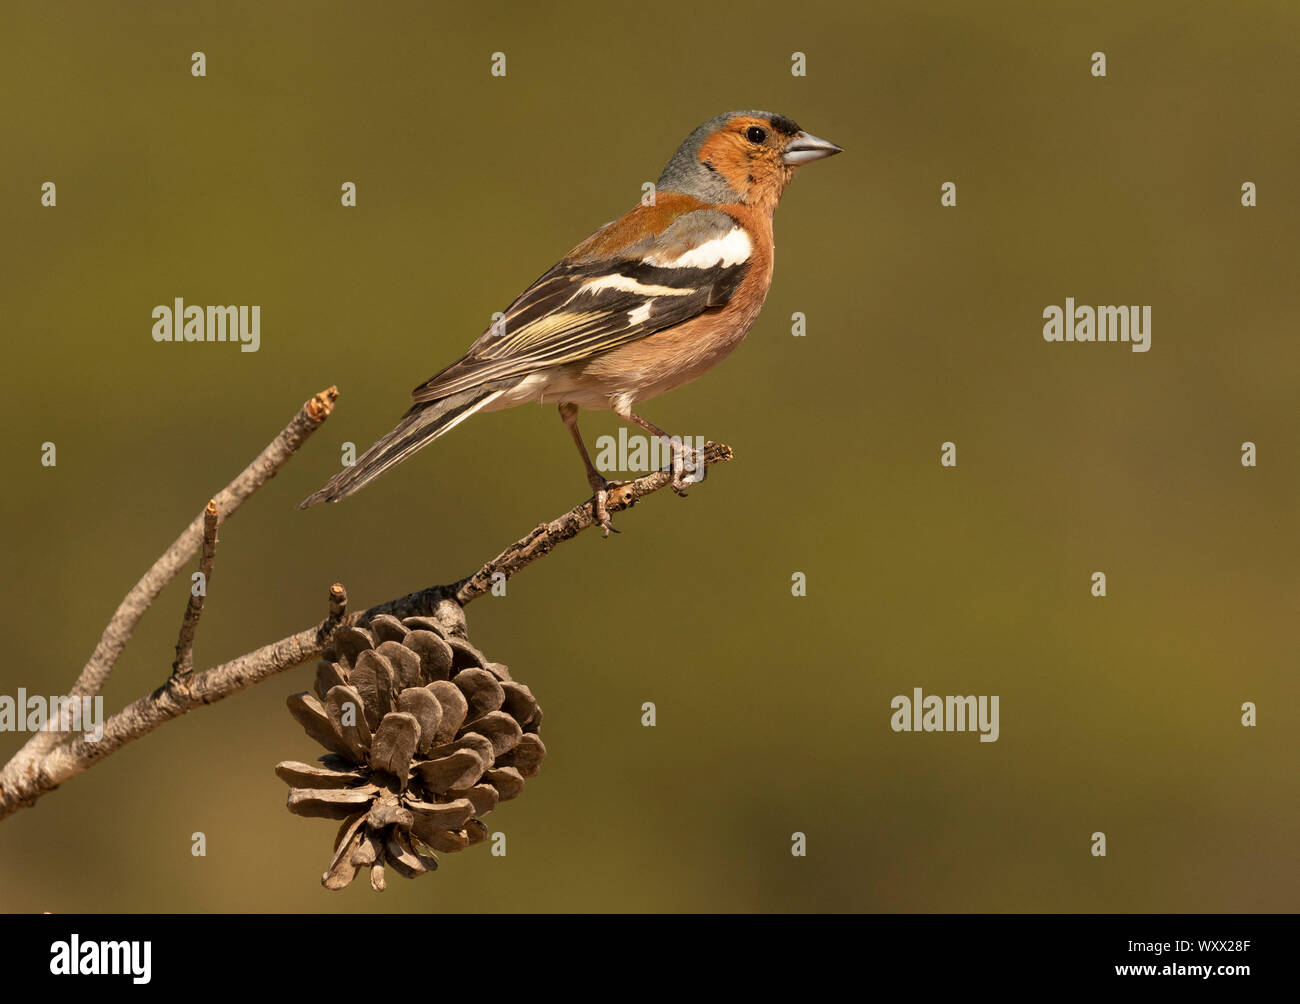 Chaffinch (Fringilla coelebs) perched on a branch, Spain Stock Photo